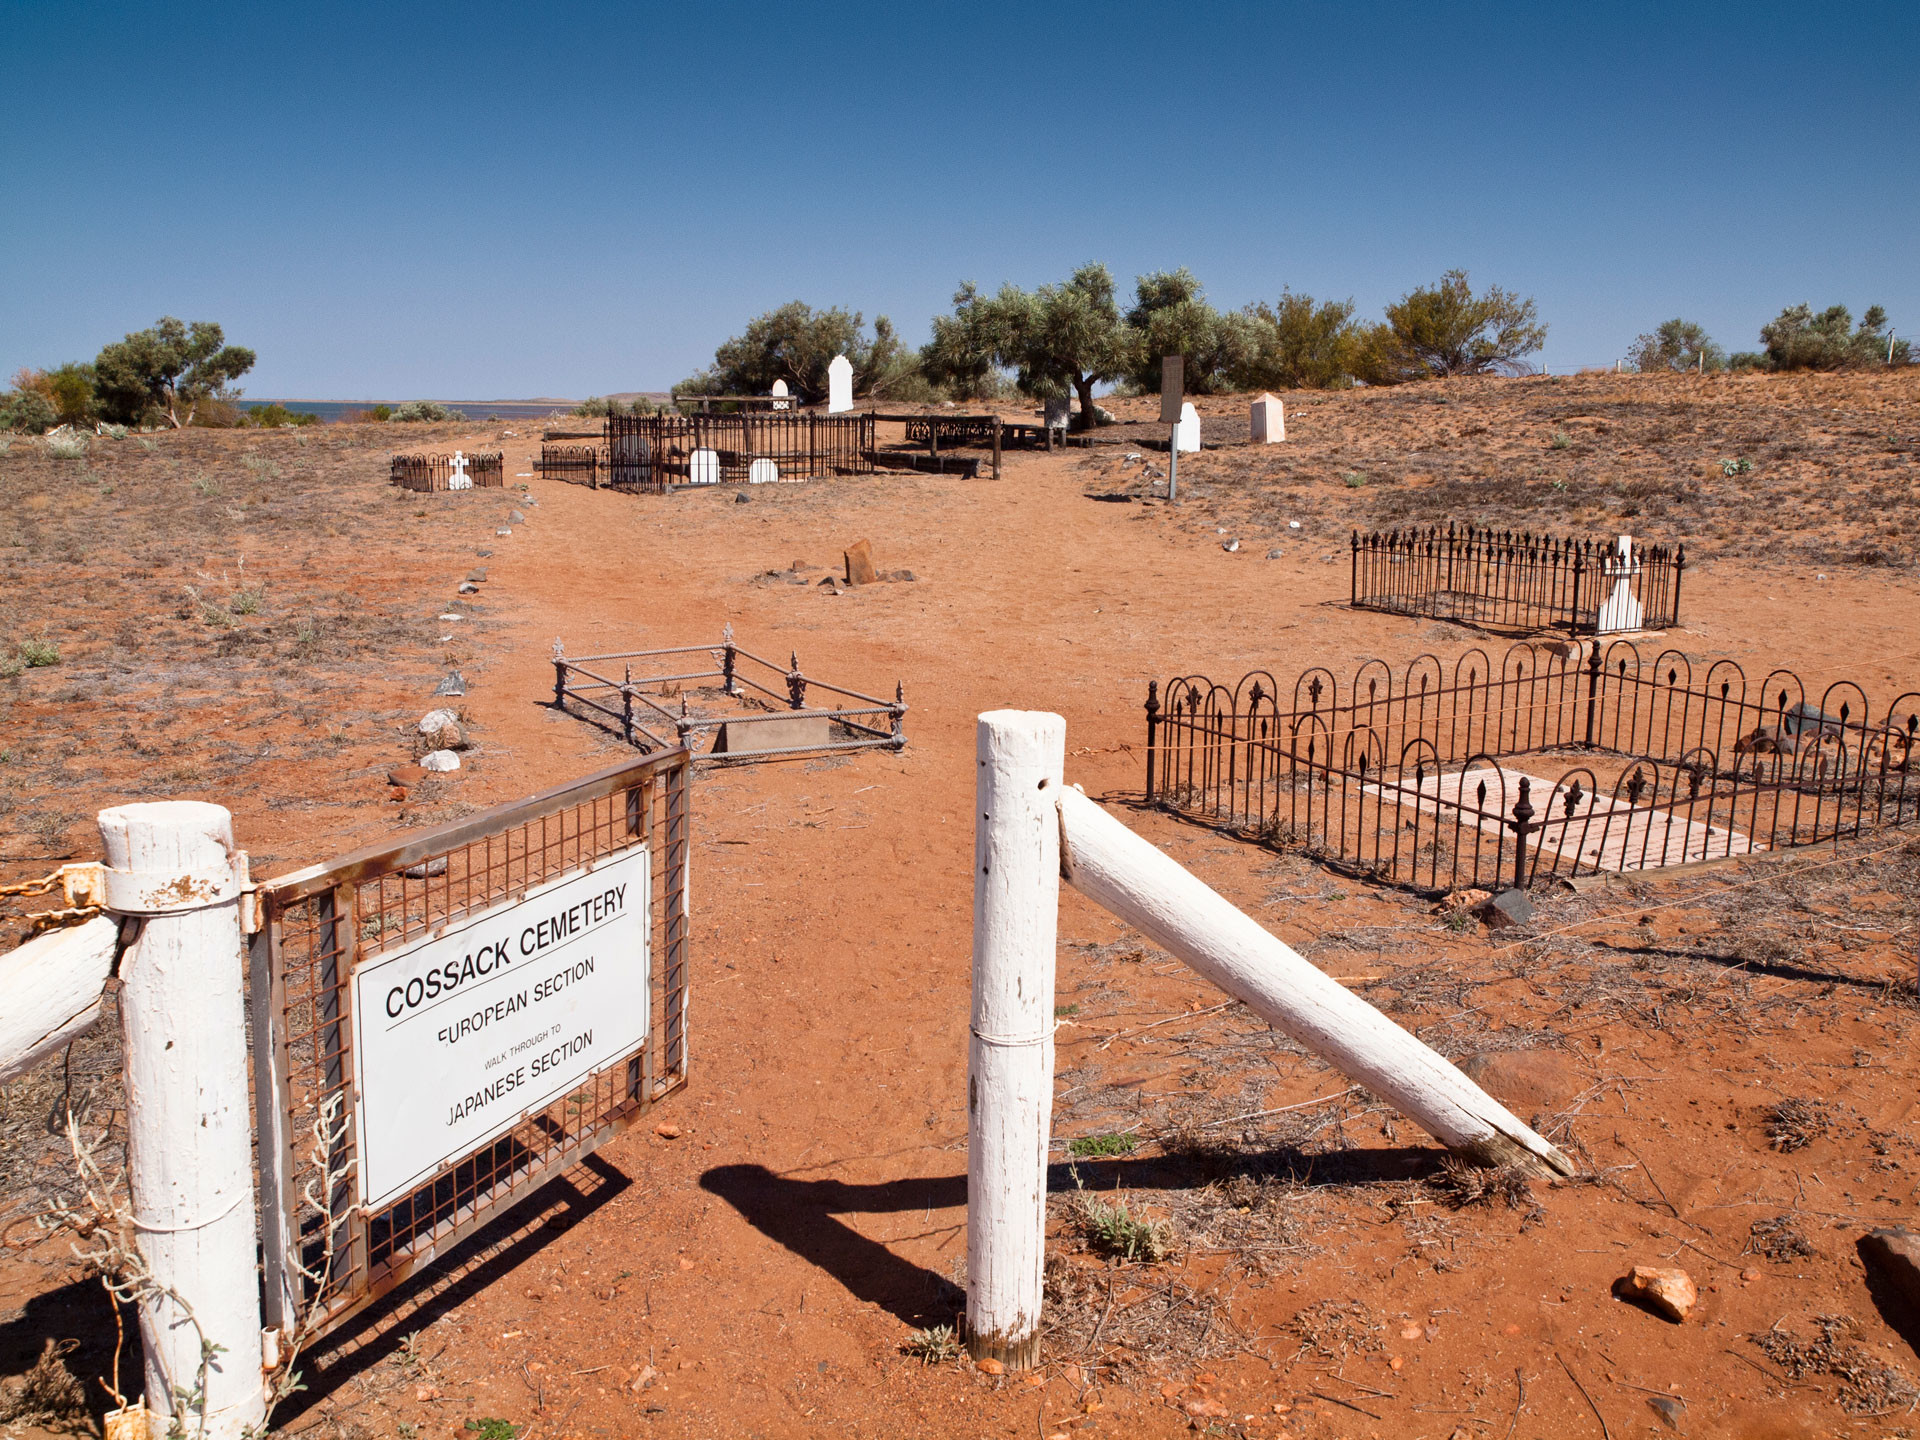 Cossack is a historic ghost town in the Pilbara region, Western Australia, and was famous for pearls and gold in the 1800s.